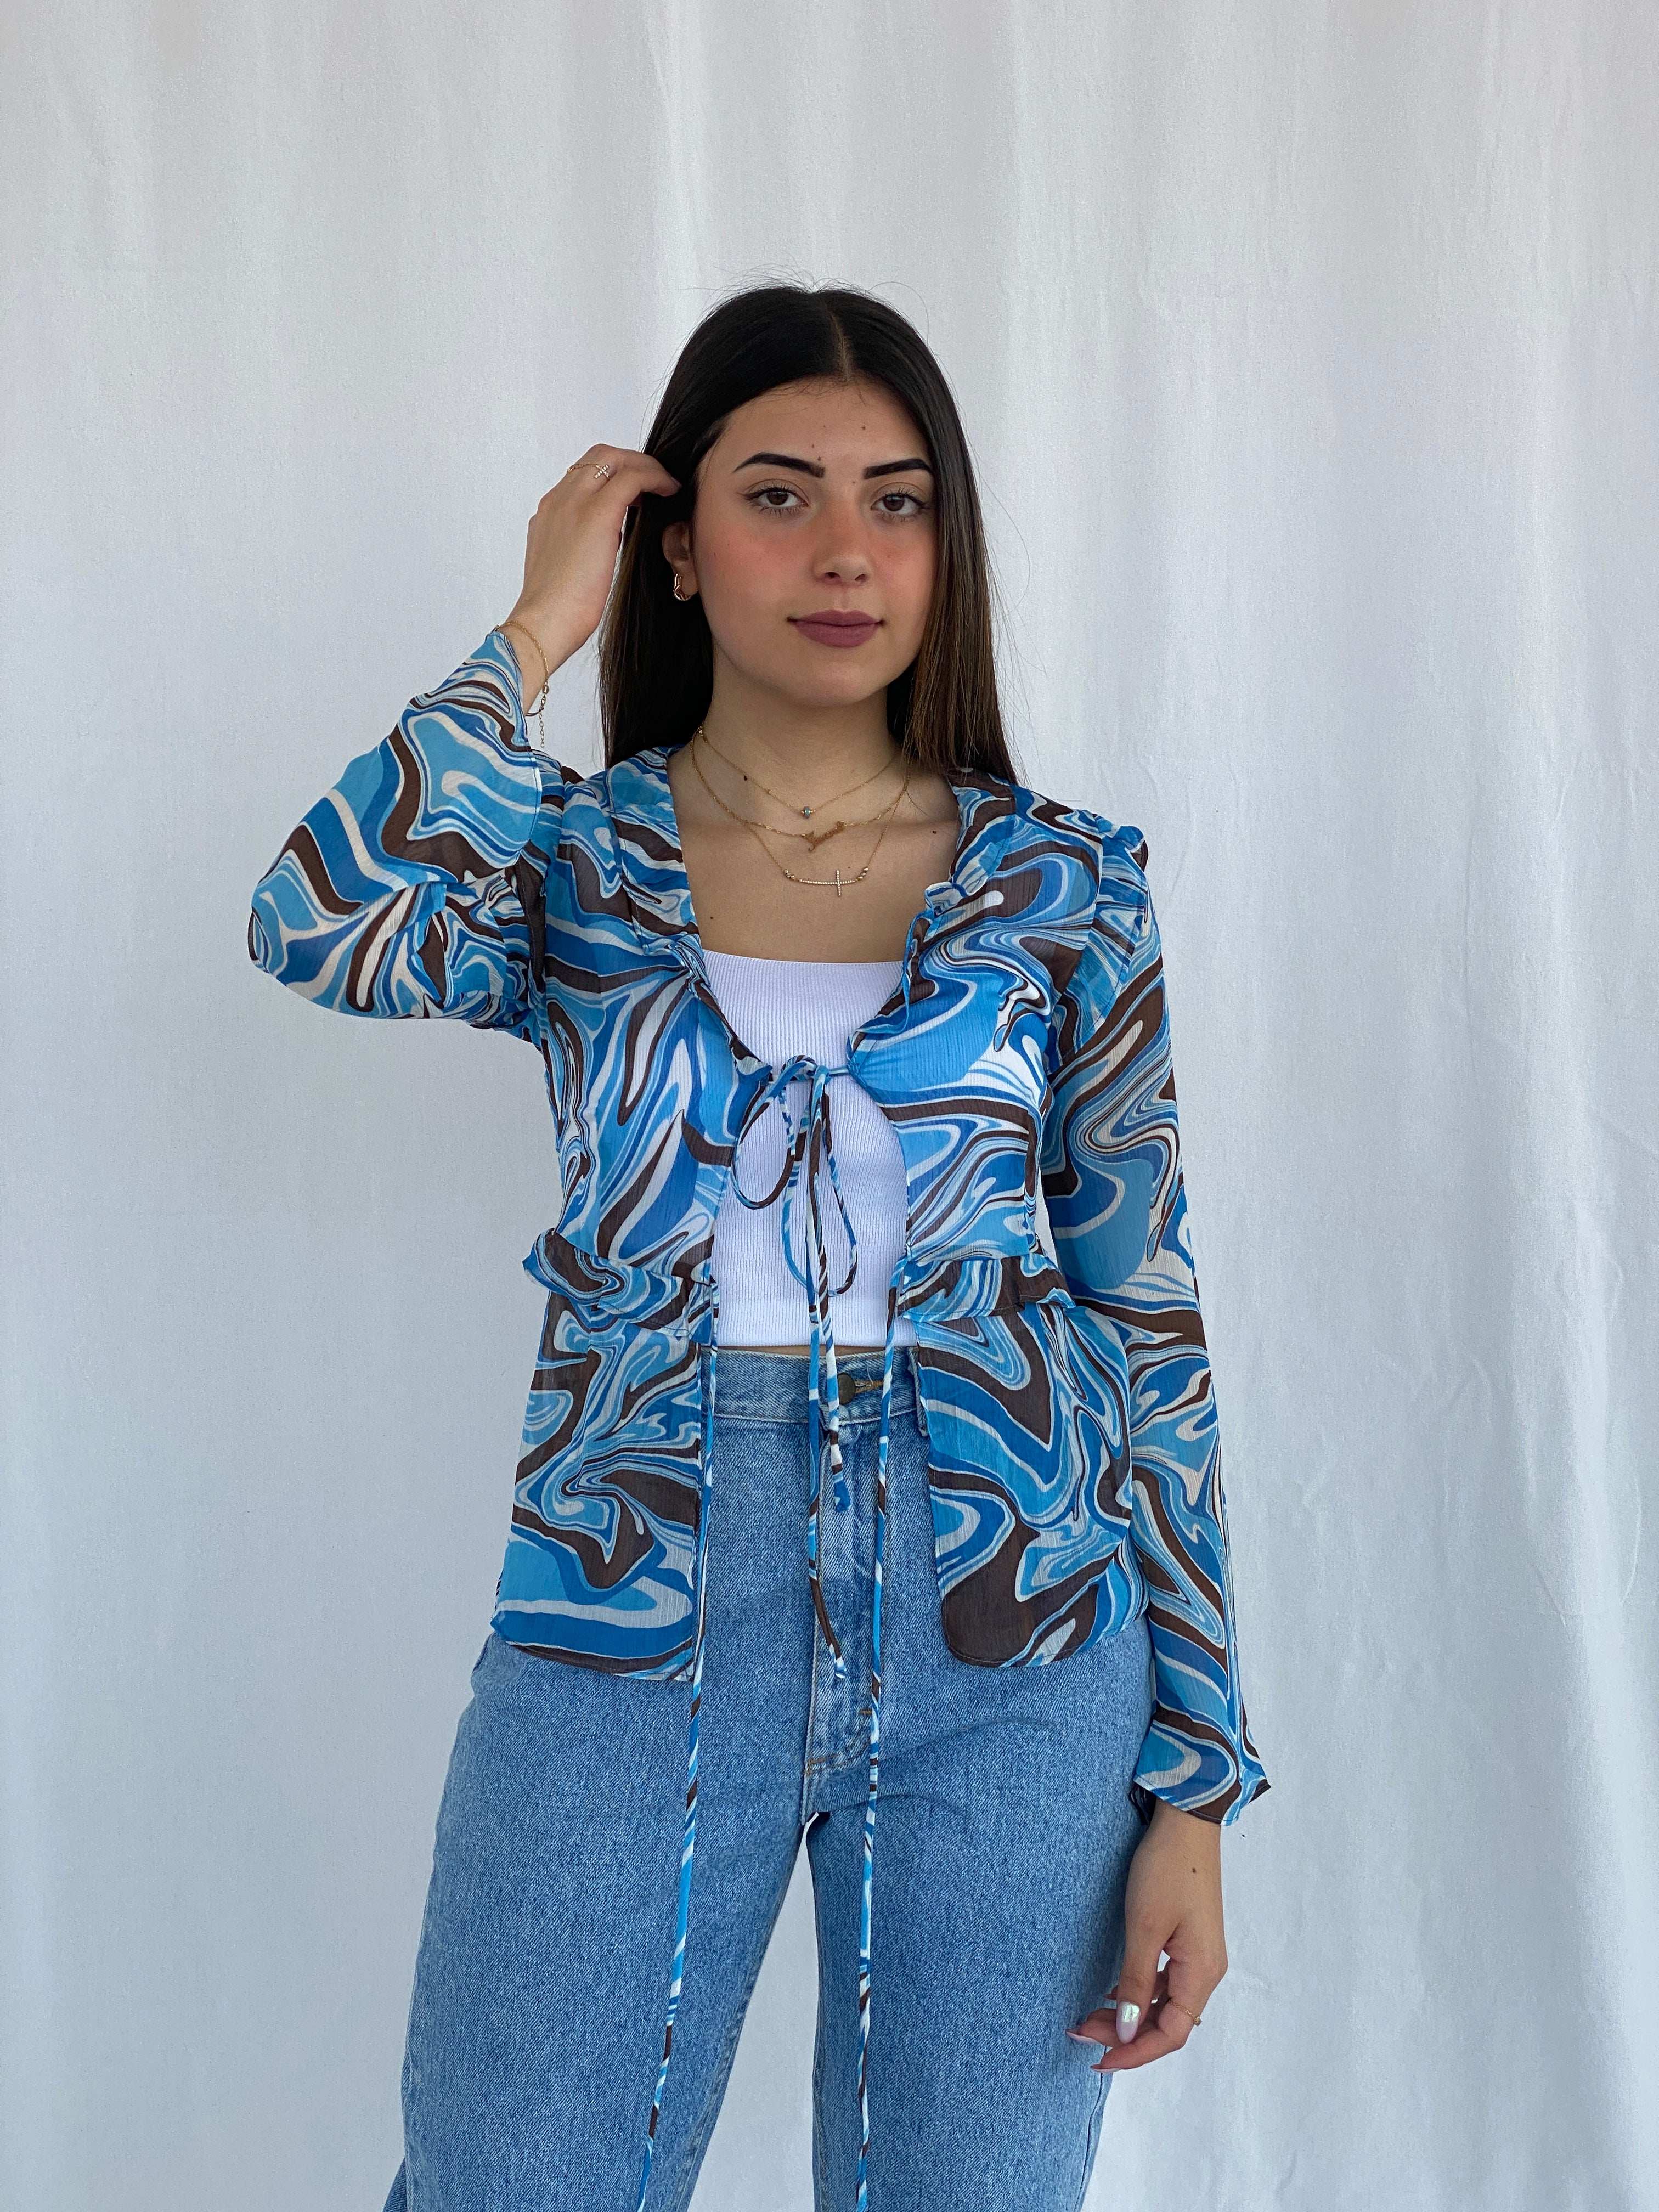 Groovy Blue and Brown Pomelo Sheer Cardigan Size S - Balagan Vintage Cardigan cardigan, full sleeve shirt, groovy, groovy print, groovy shirt, Juana, NEW IN, women skirt